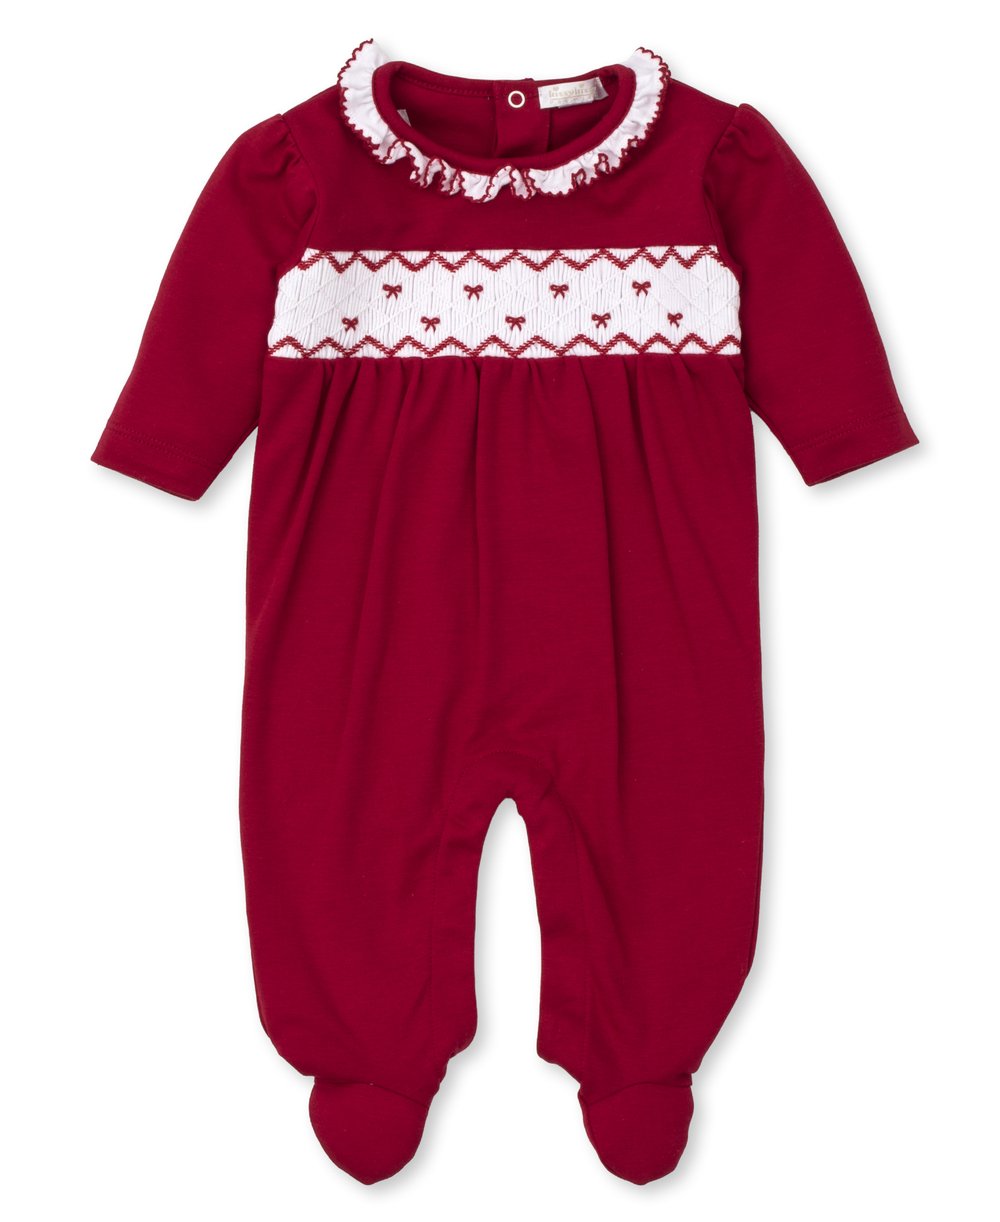 CLB Holiday Medley 21 Red Ruffle Collar Hand Smocked Footie